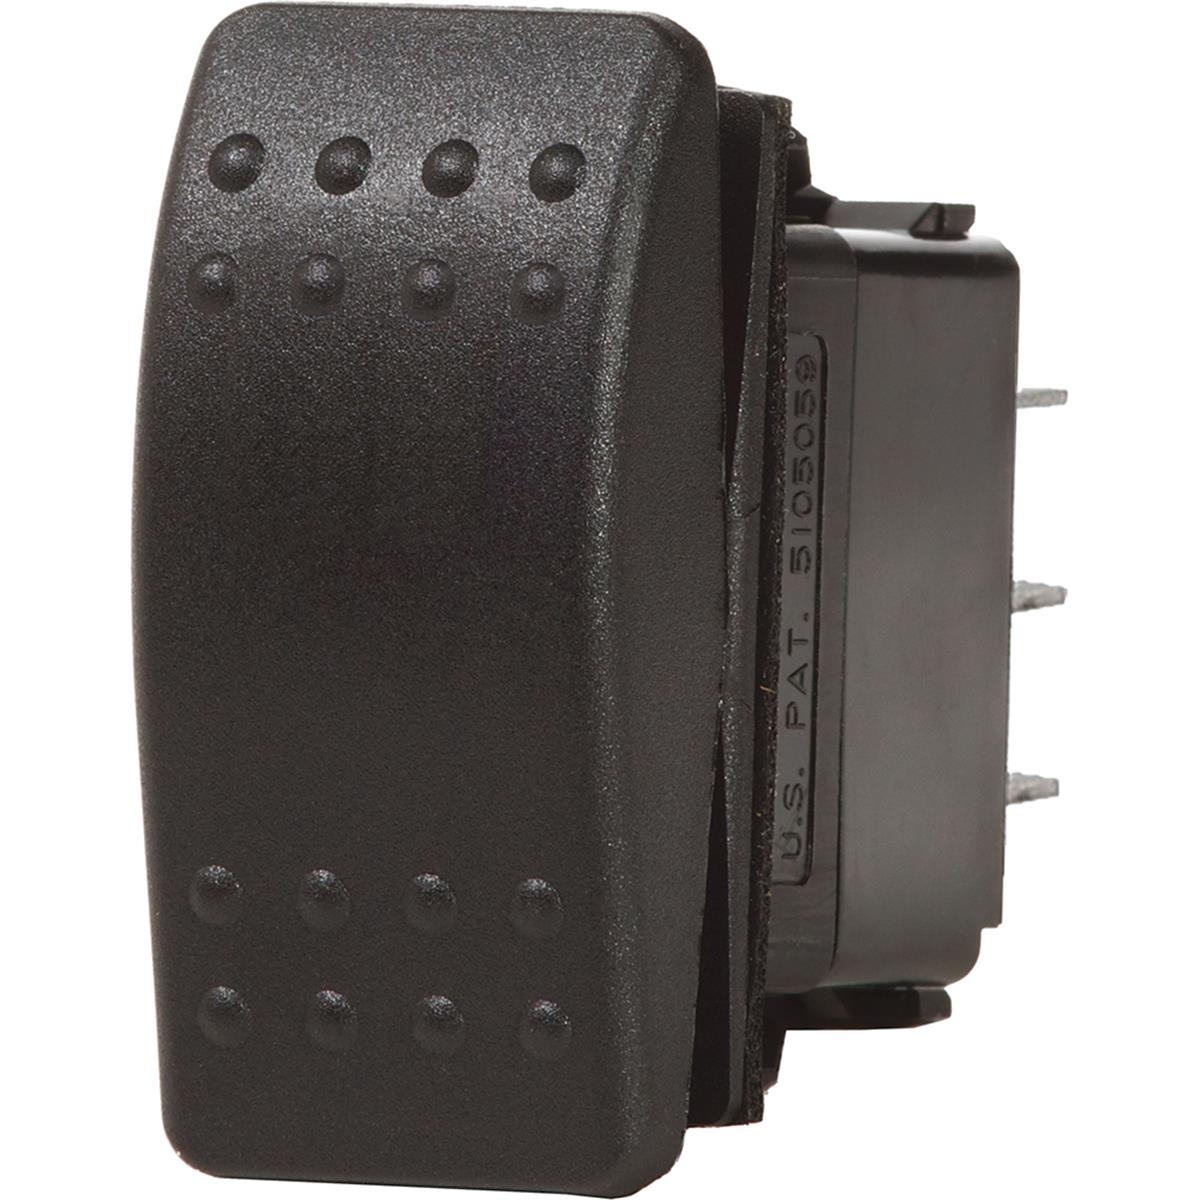 Picture of Blue Sea Systems 7935 COntura II Off-On Switch DPST, Black